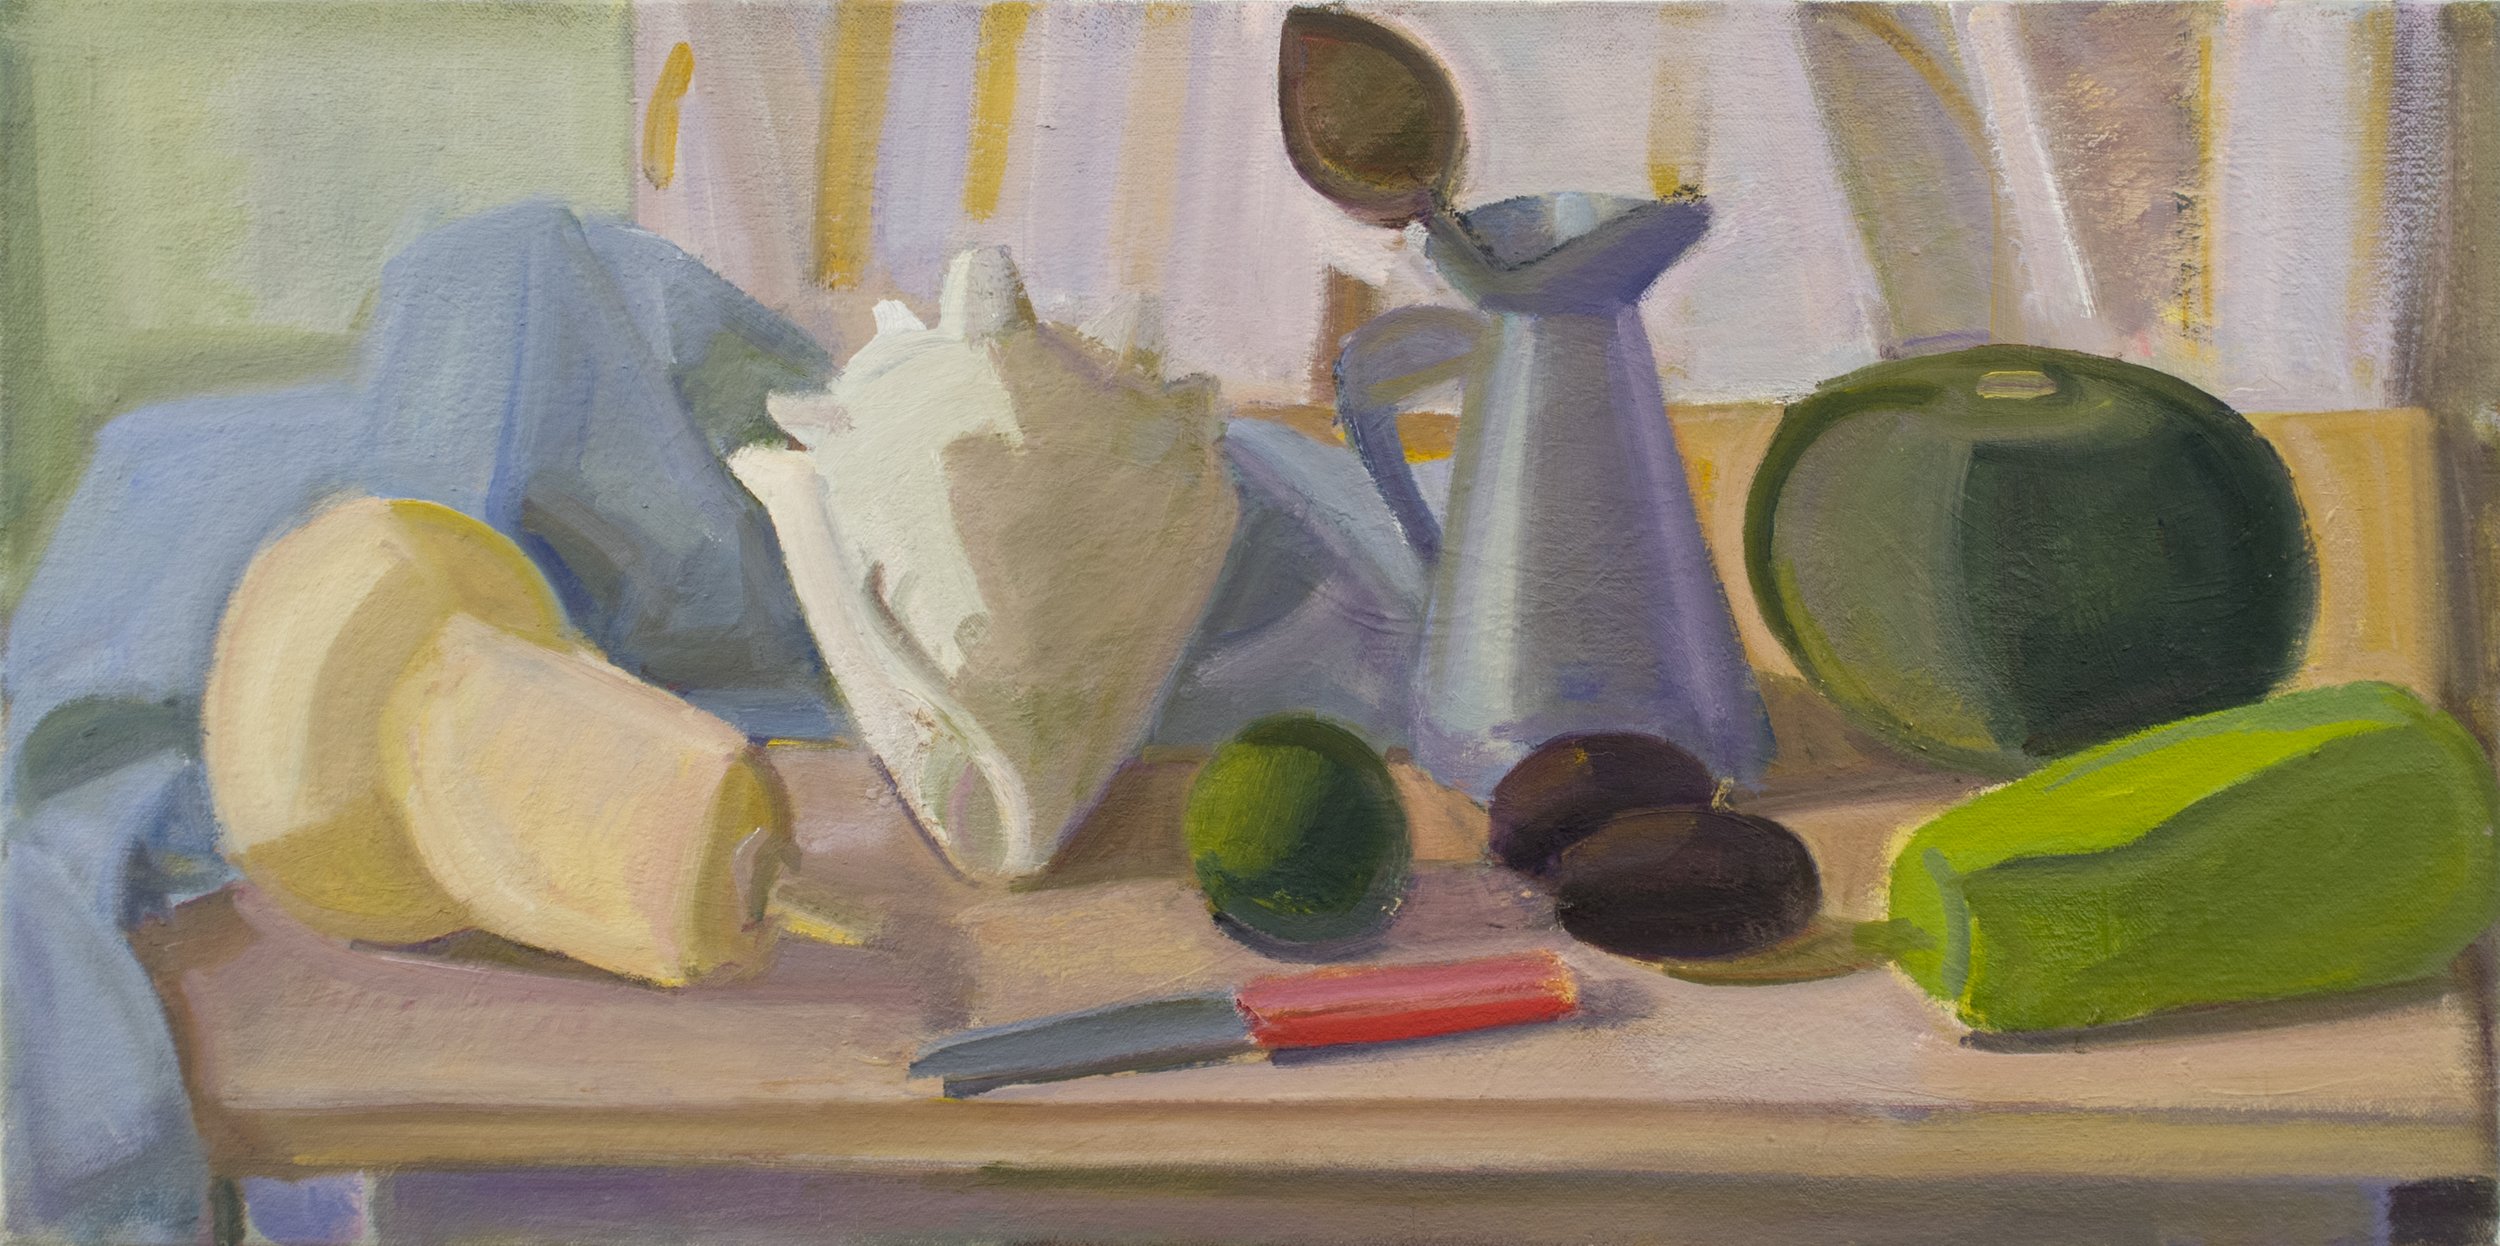   Shell, Cabocha, Butternut and Bottle Gourd , c. 2013, oil/canvas, 12 x 24 in. (Collection of Wright State University) 